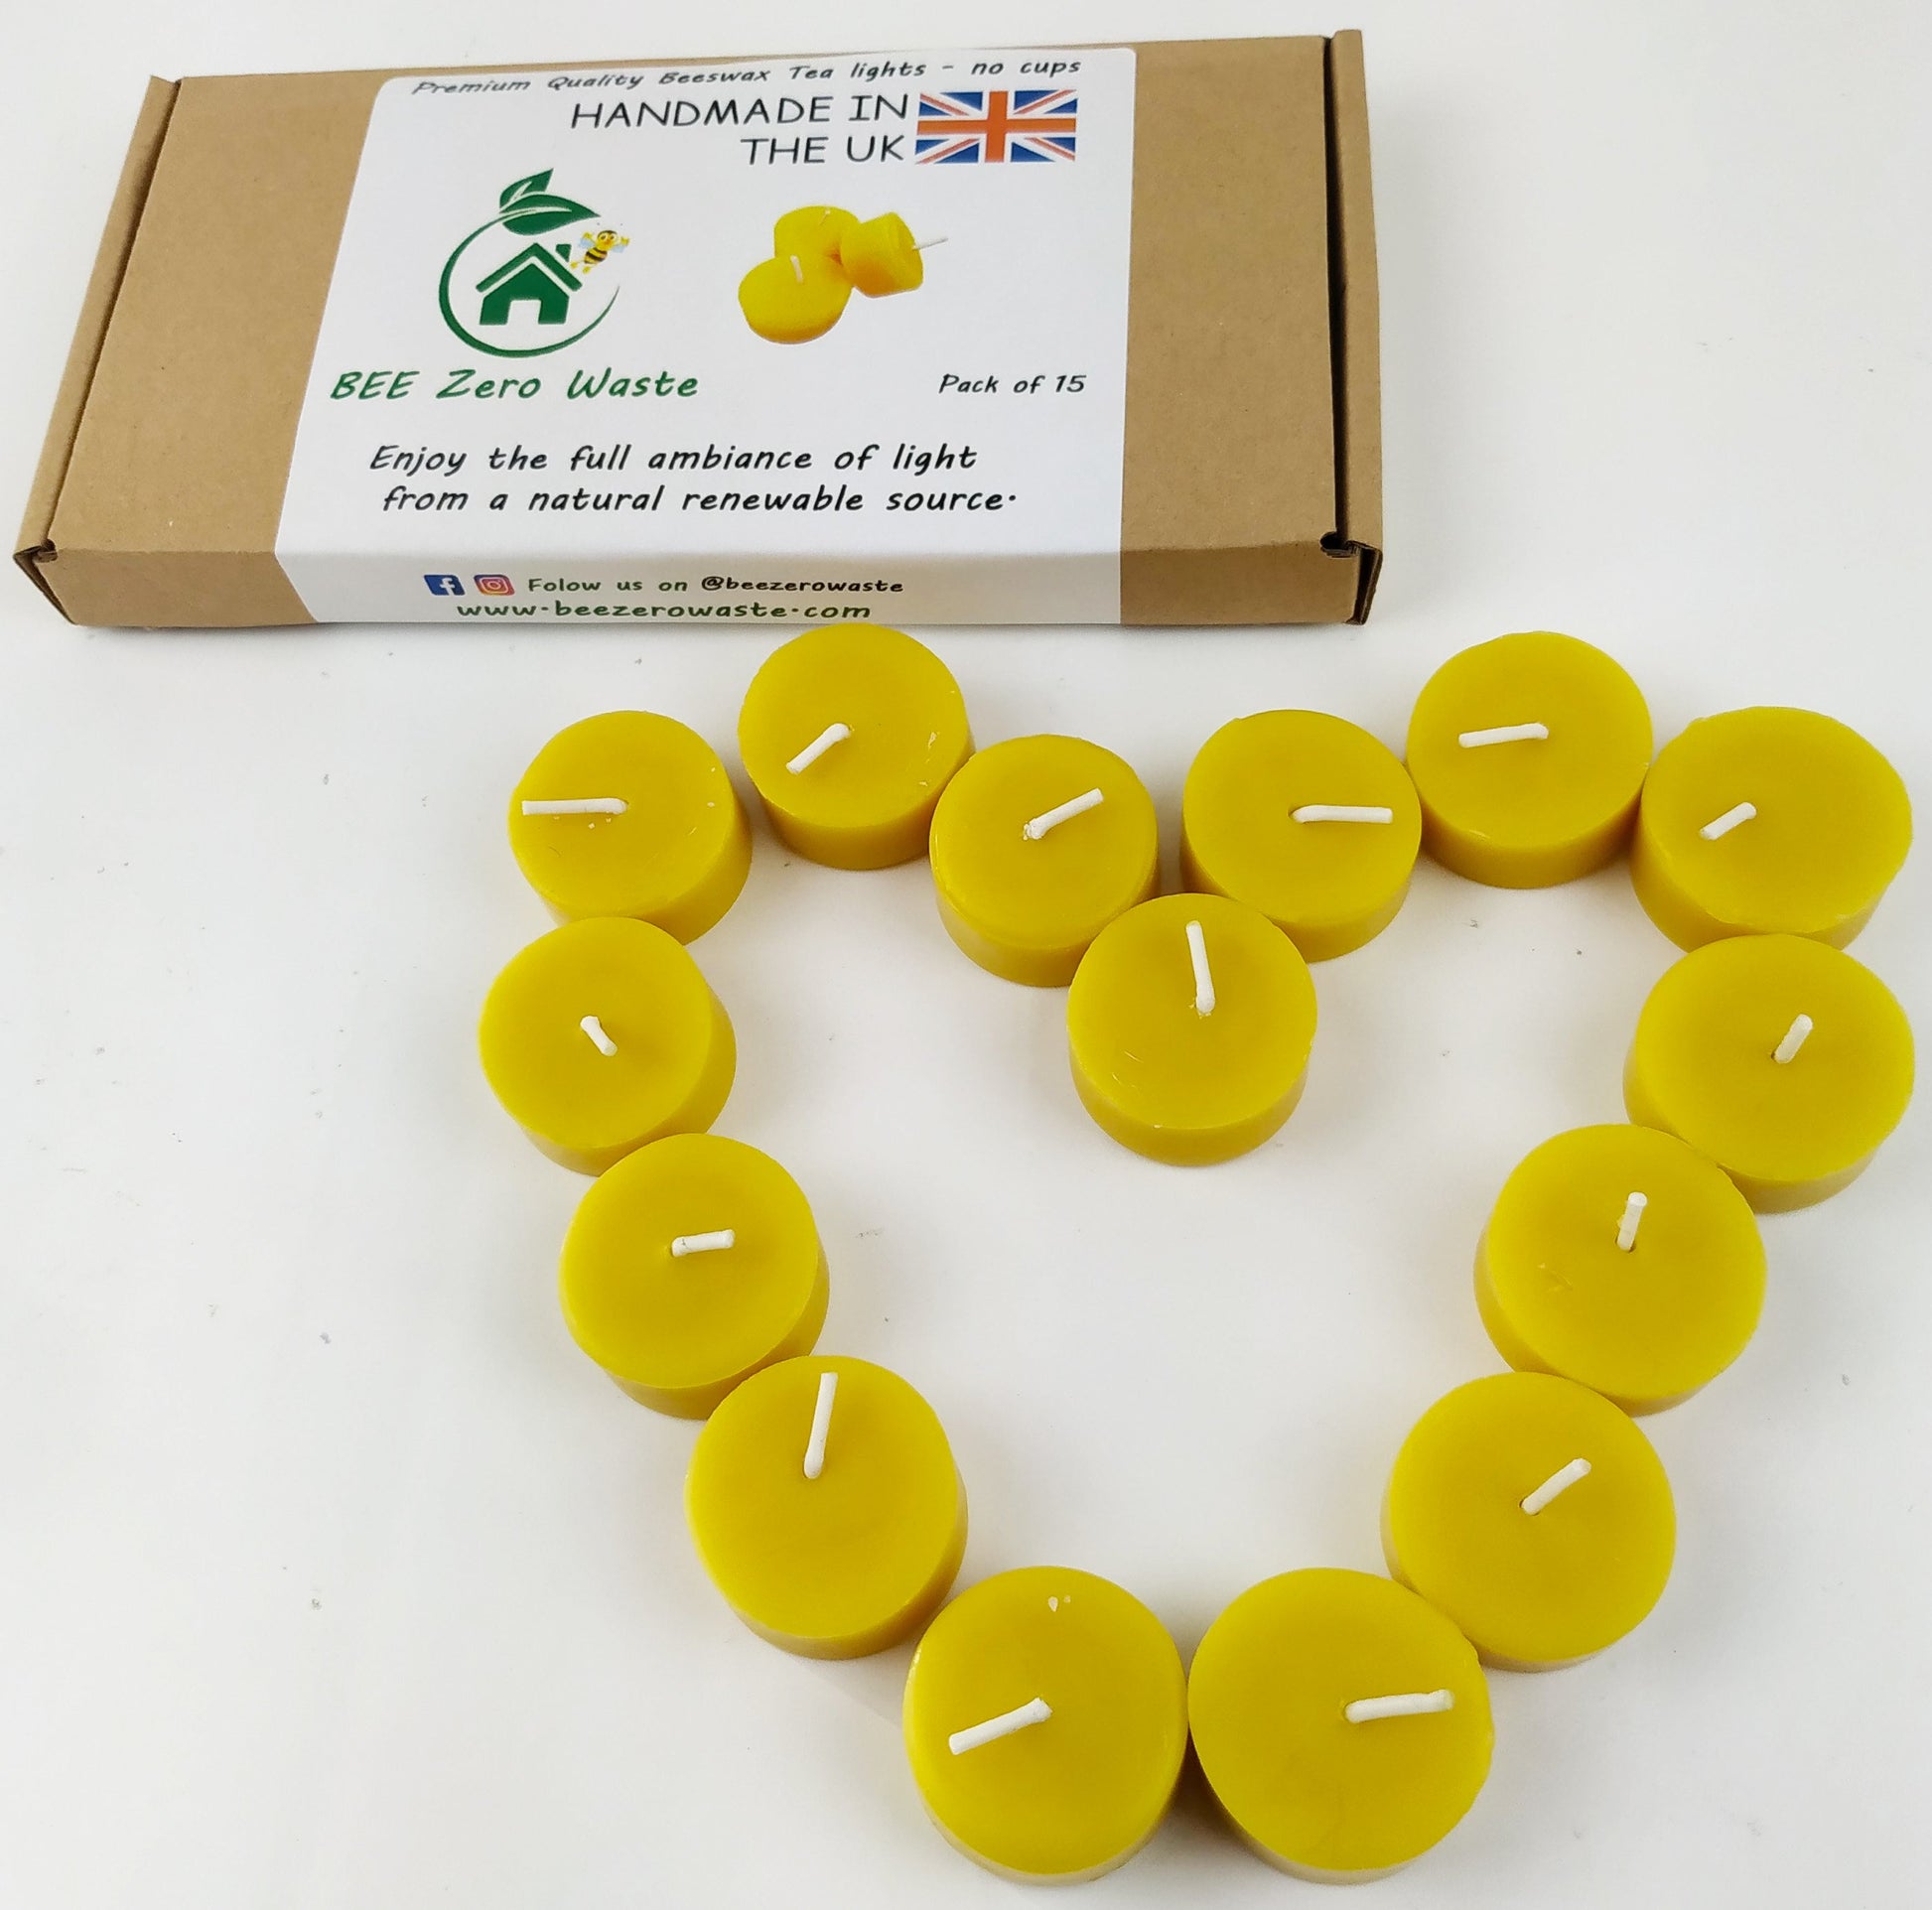 Beeswax tealights, Hand poured in the UK, natural tea candles, 100% beeswax-various packs & refills - BEE Zero Waste